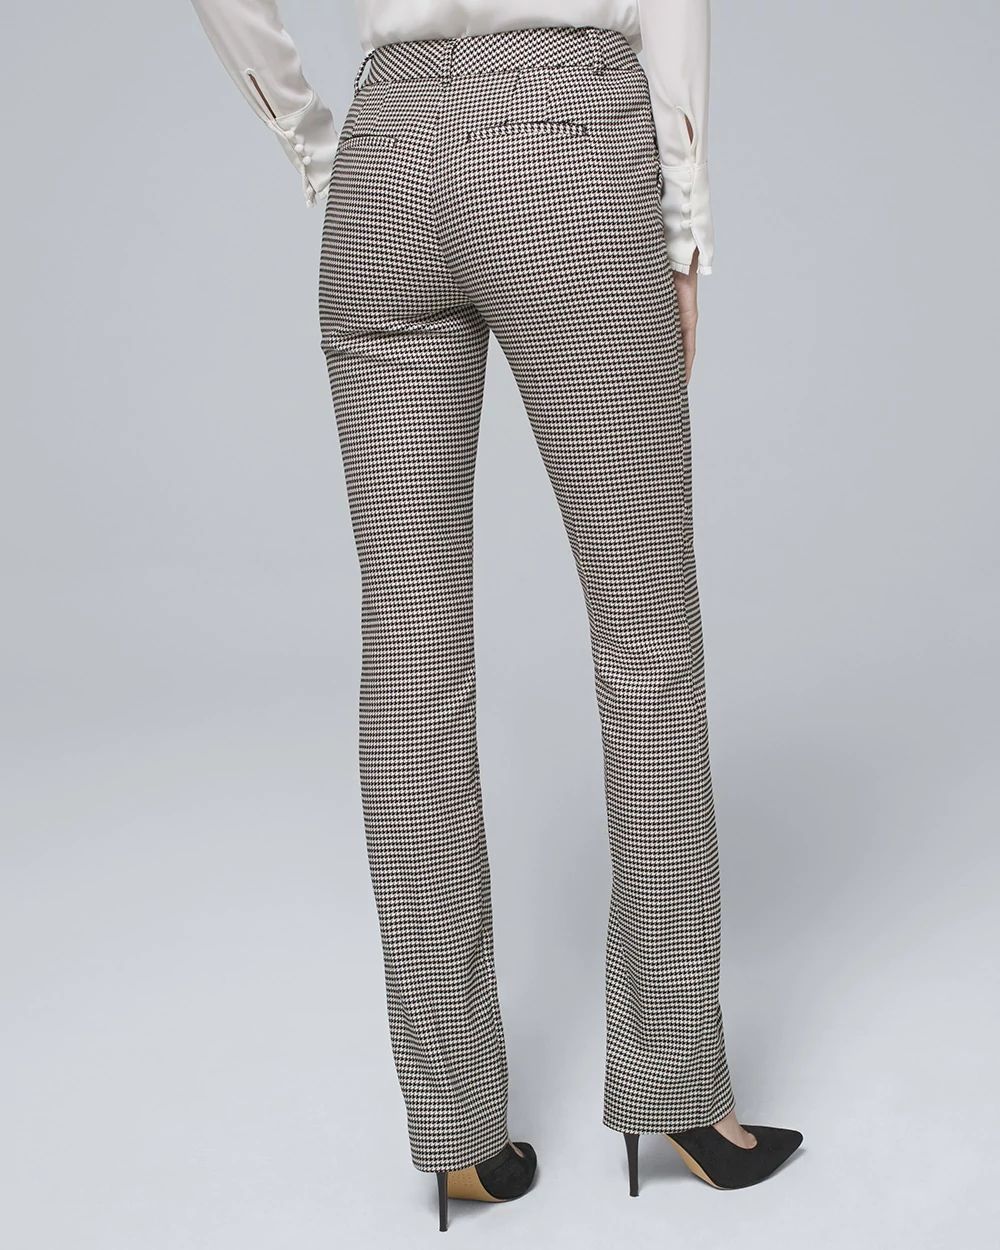 Houndstooth Suiting Slim Pants click to view larger image.